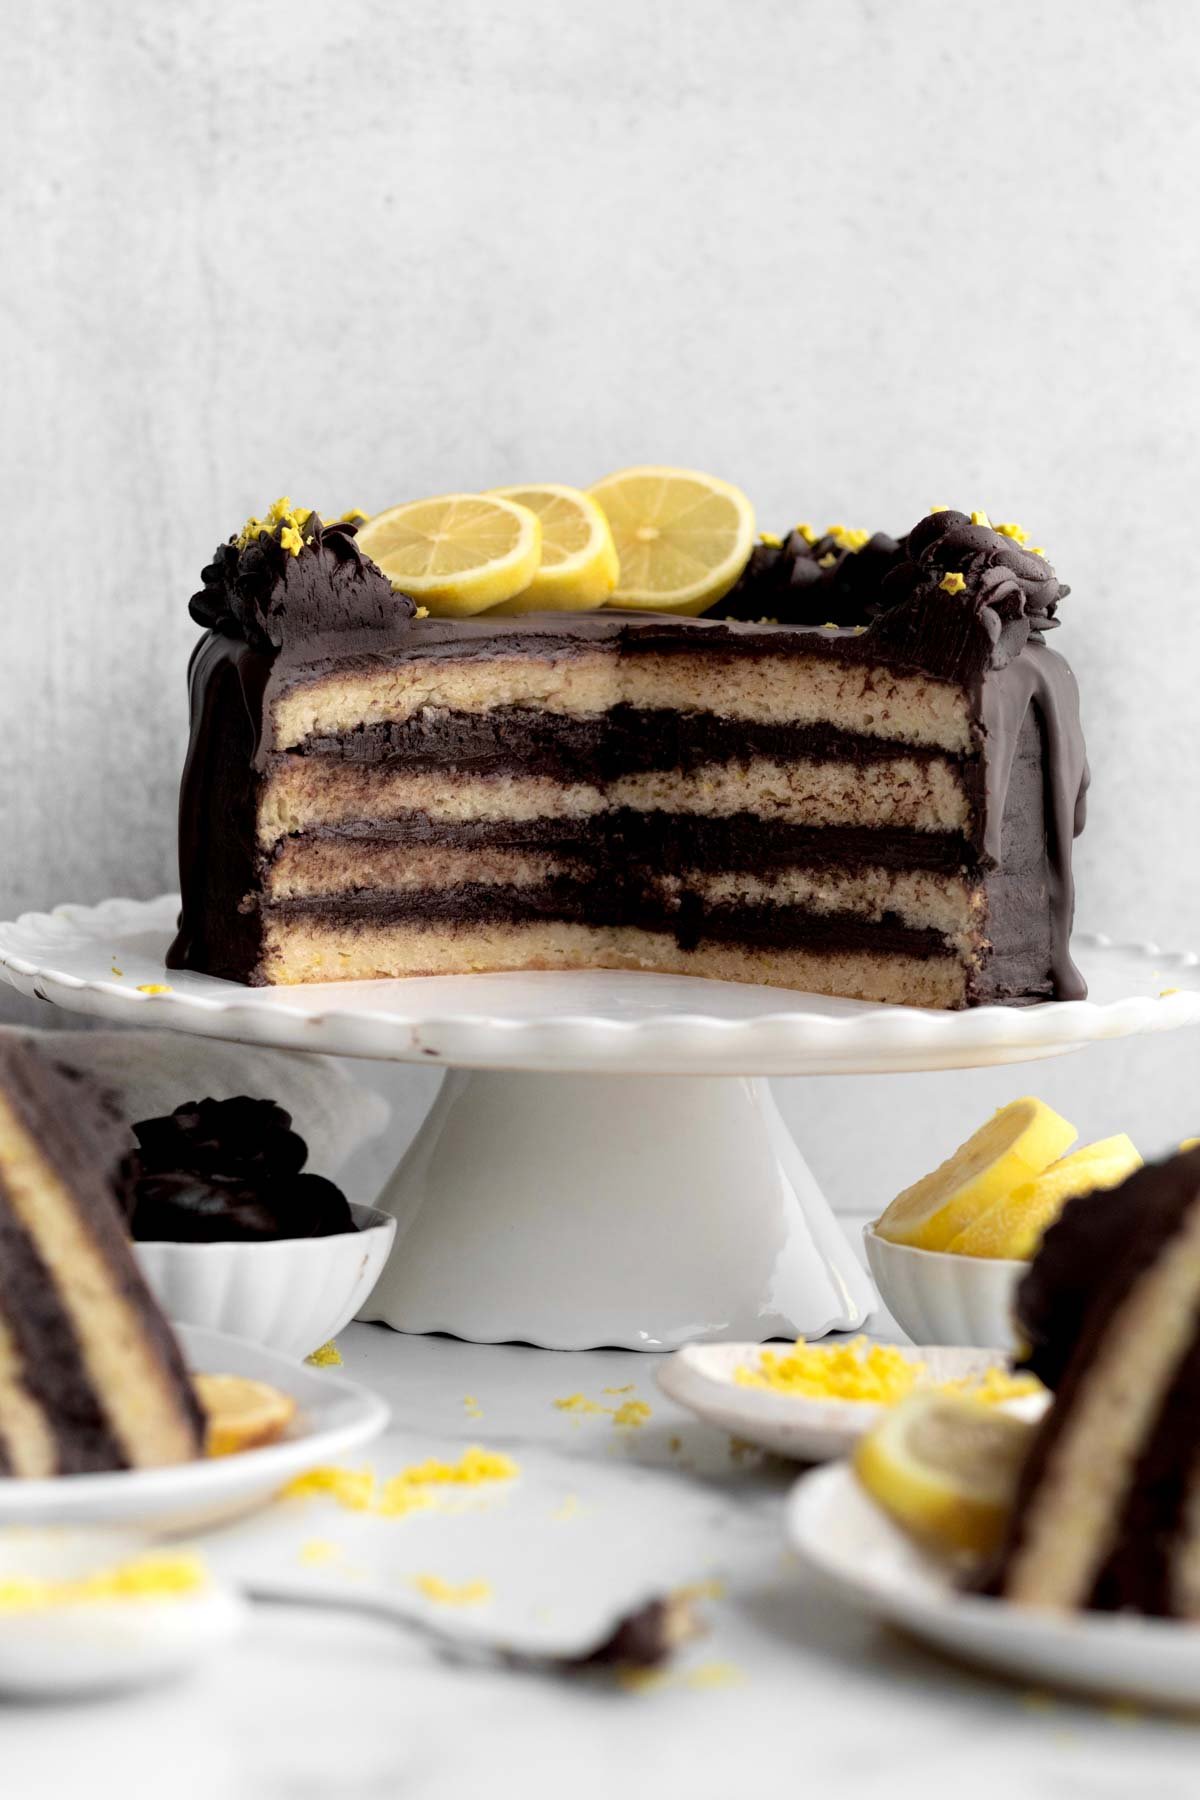 An inside look at the four layers of cake.